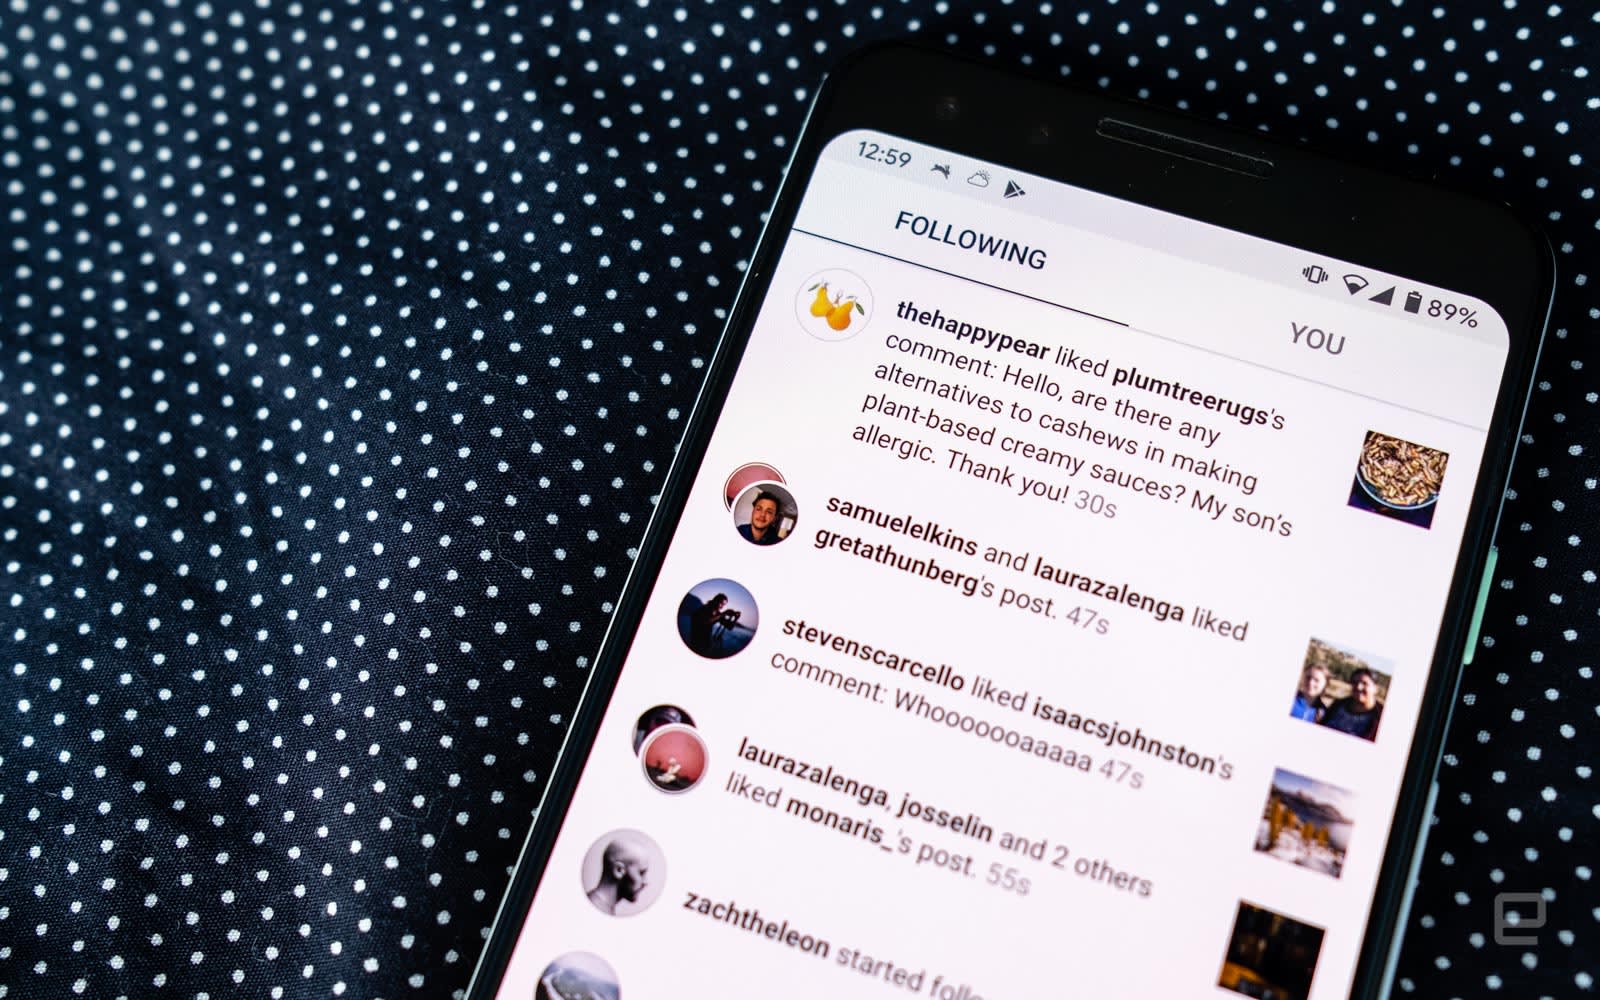 Flipboard: Instagram is removing its 'Following' activity tab1600 x 1000